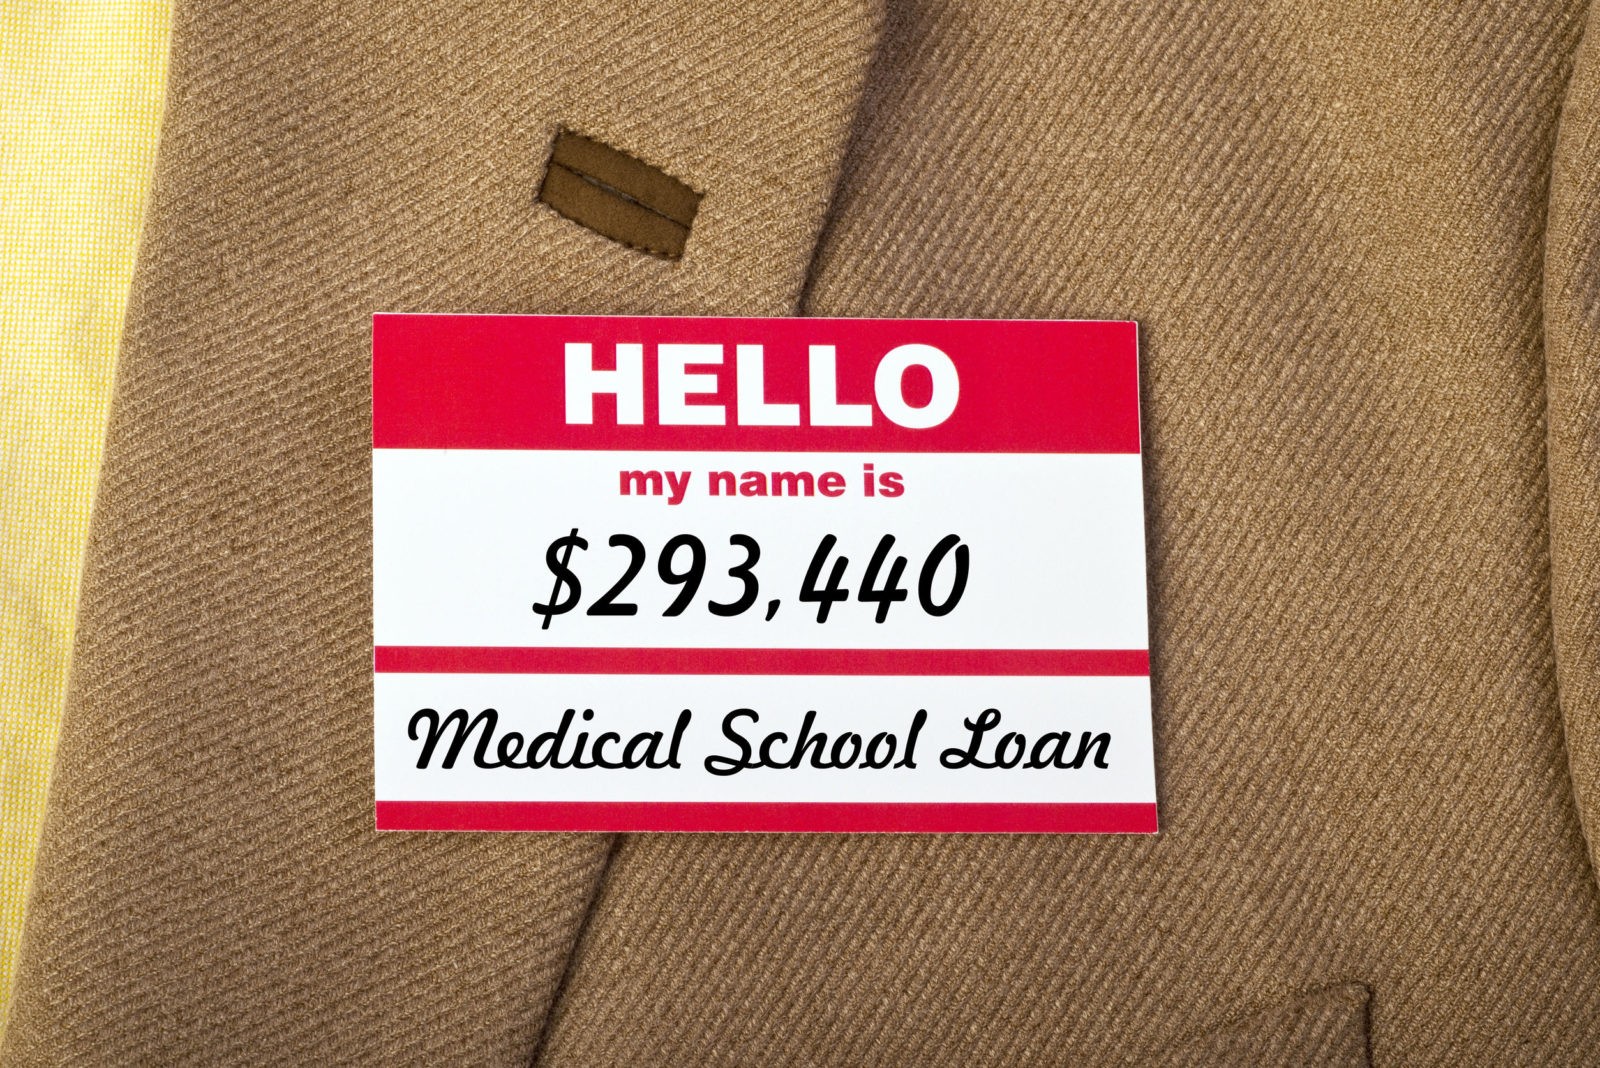 How to Handle Your Medical Student Loans Like a Pro